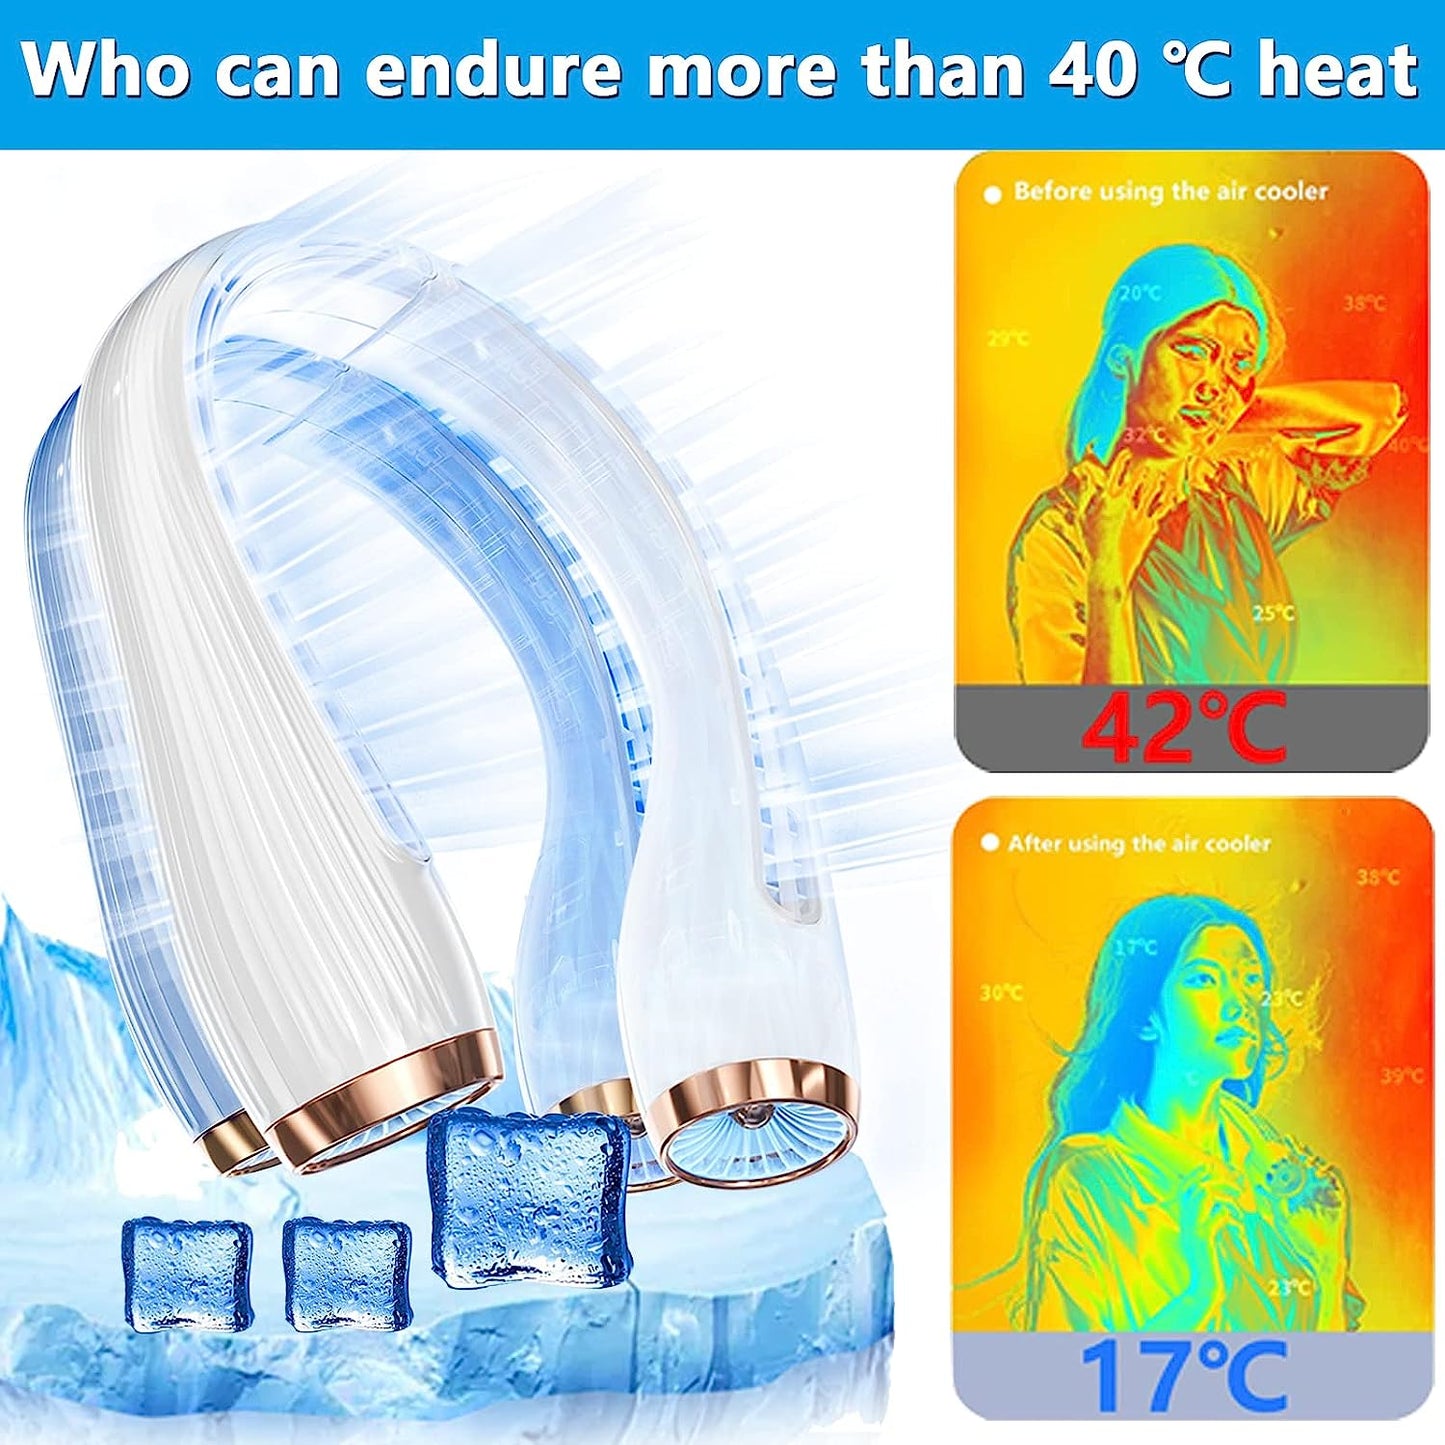 Matihuno Neck air conditioner 24 hours of battery life 8000mAh neck fan Portable neck air conditioner Ultra-quiet bladeless fan design No curling Even air volume on both sides